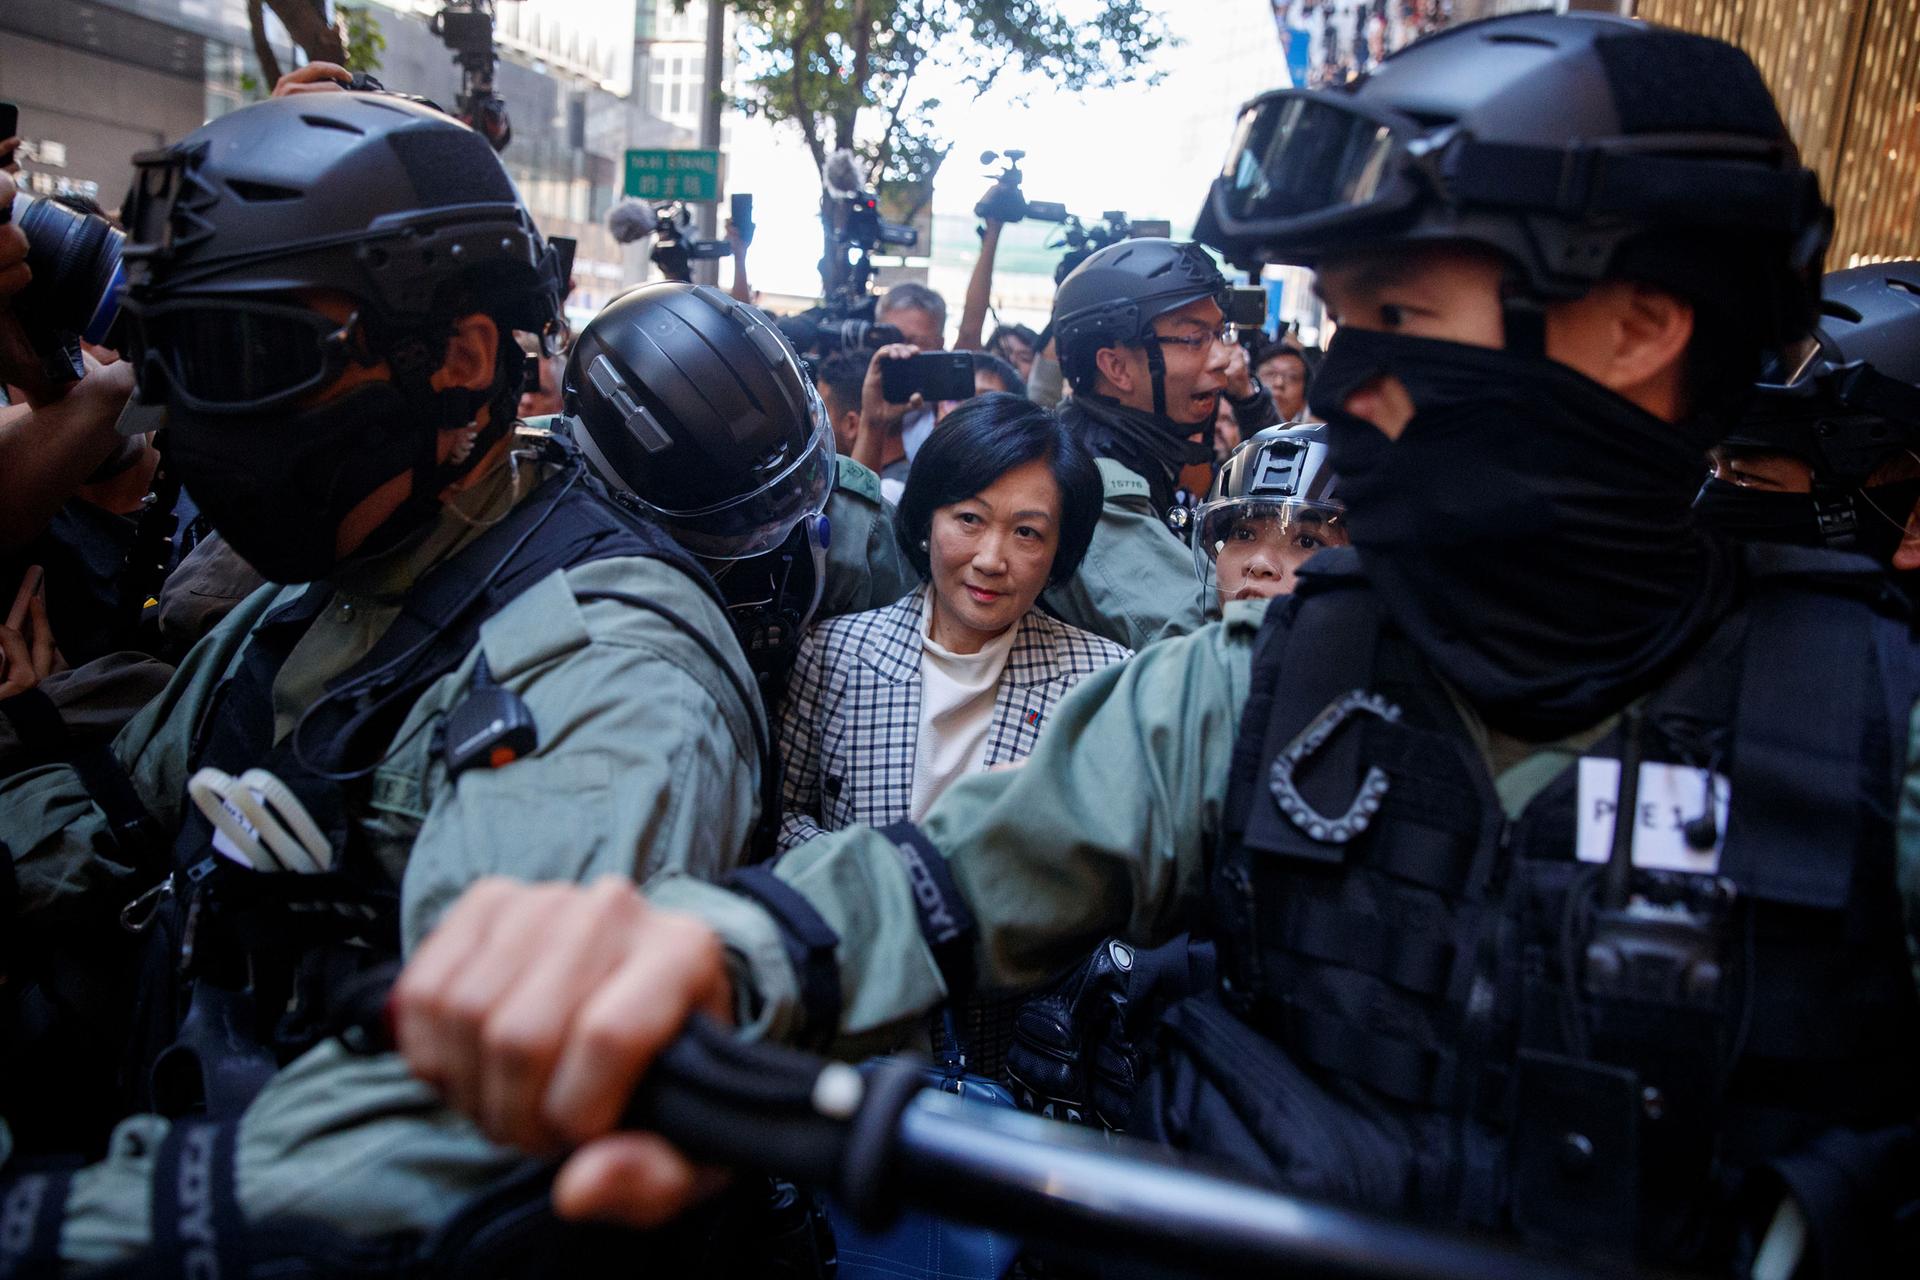 A woman is shown wearing a checkered suit coat and surrounded by an armed police escort.